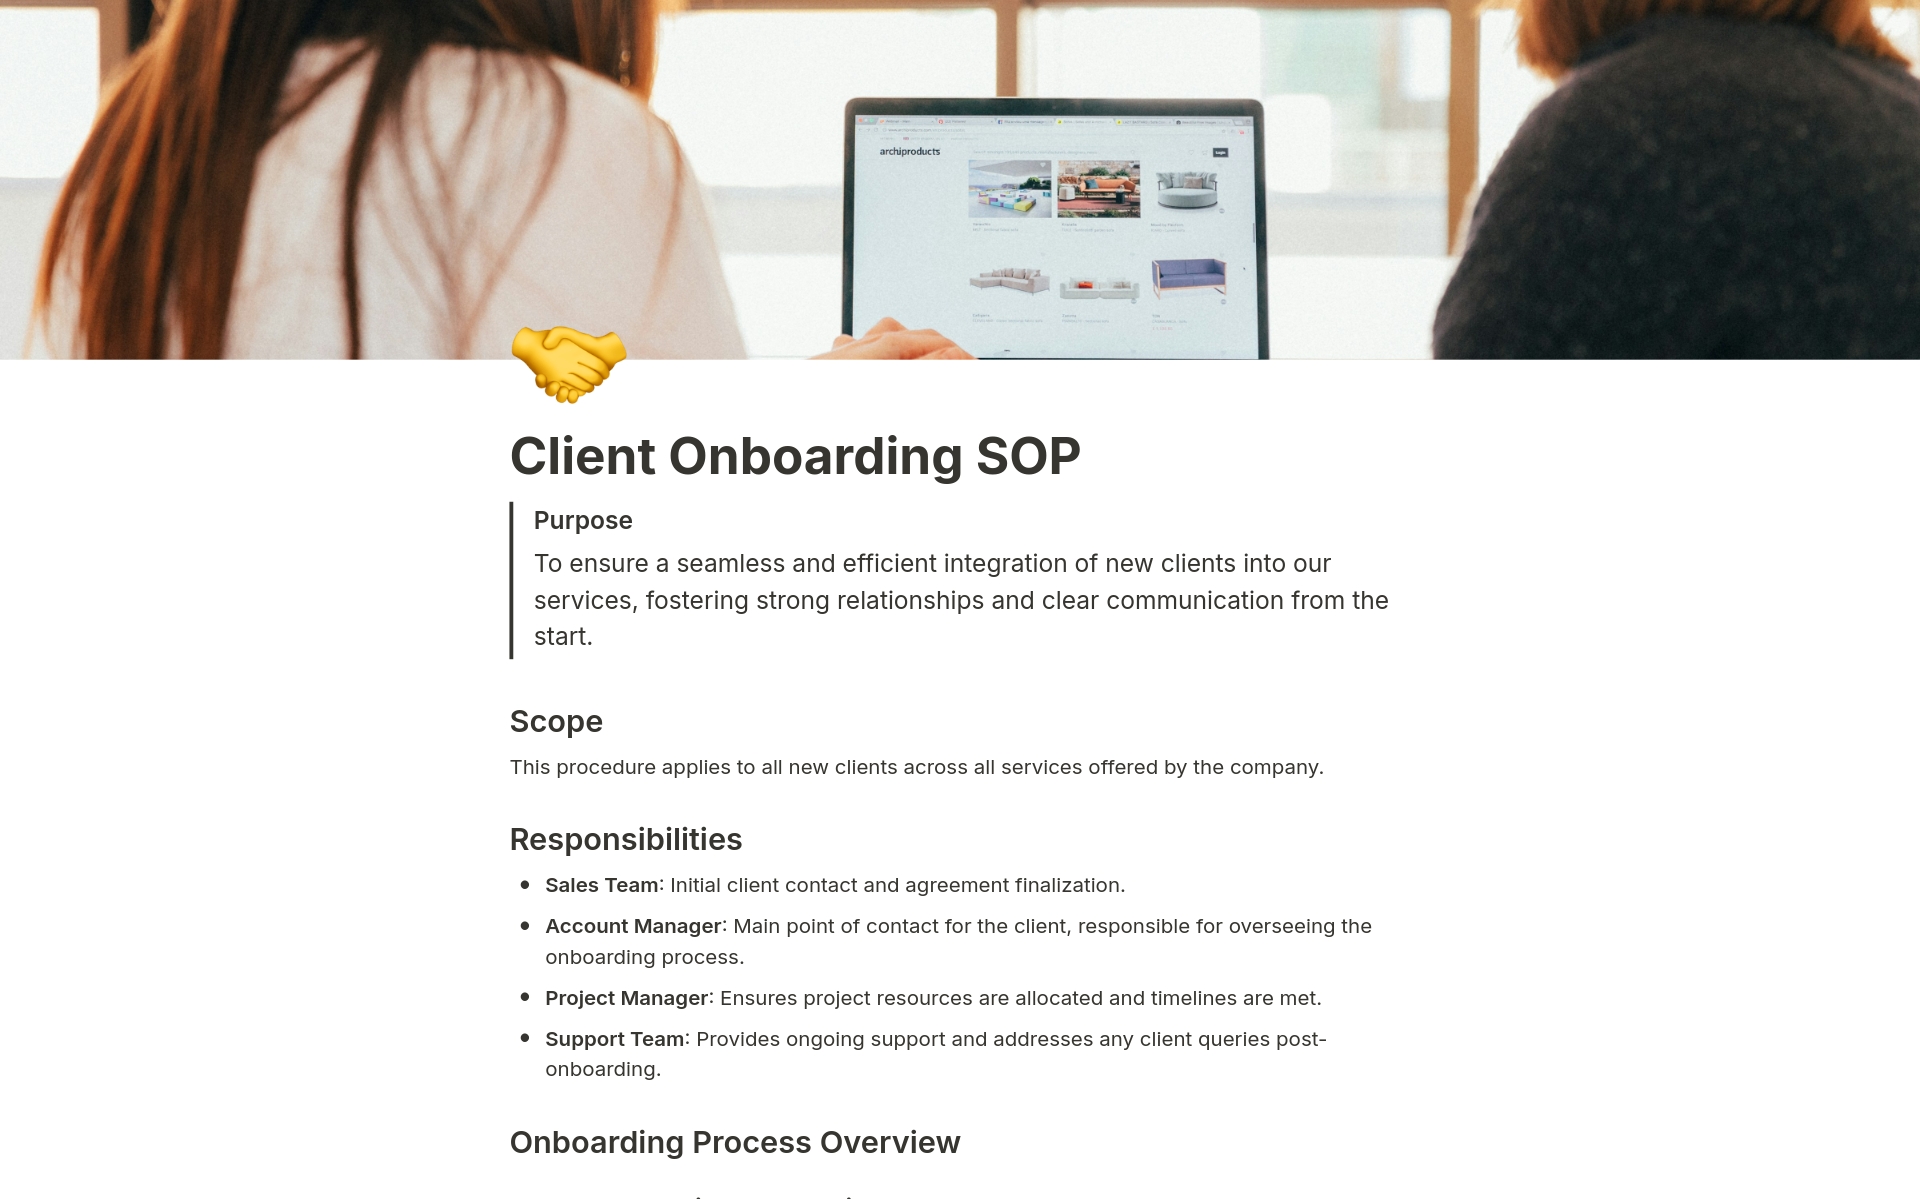 Optimize new client integration with this SOP template, ensuring efficient onboarding and strong relationships from the outset.